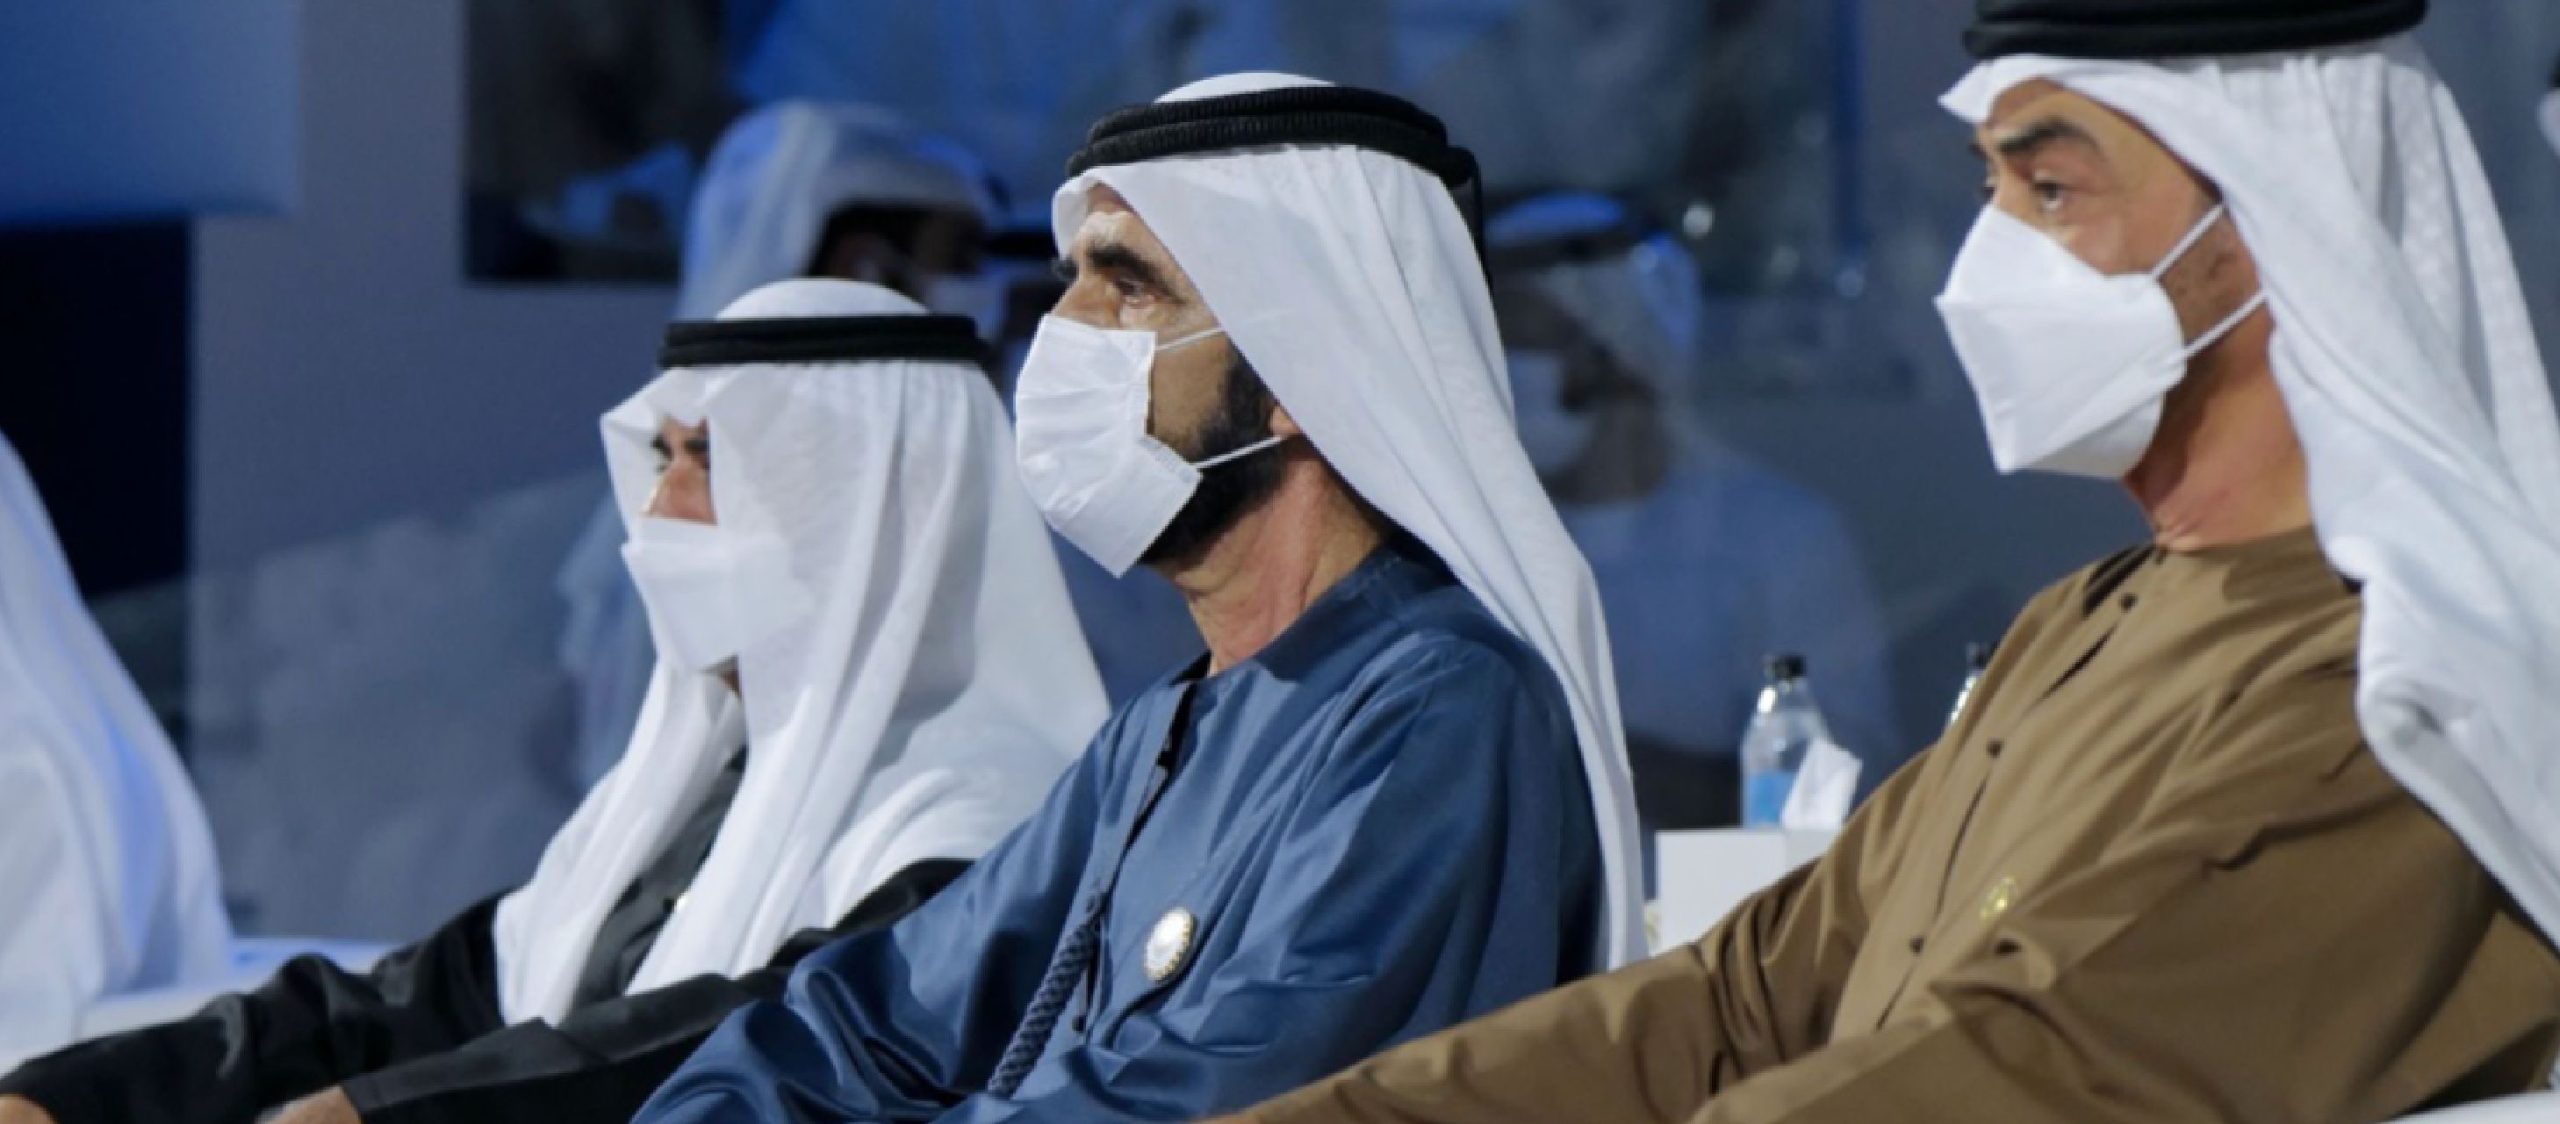 You are currently viewing Mohammed bin Rashid and Mohamed bin Zayed attend opening ceremony of Expo 2020 Dubai